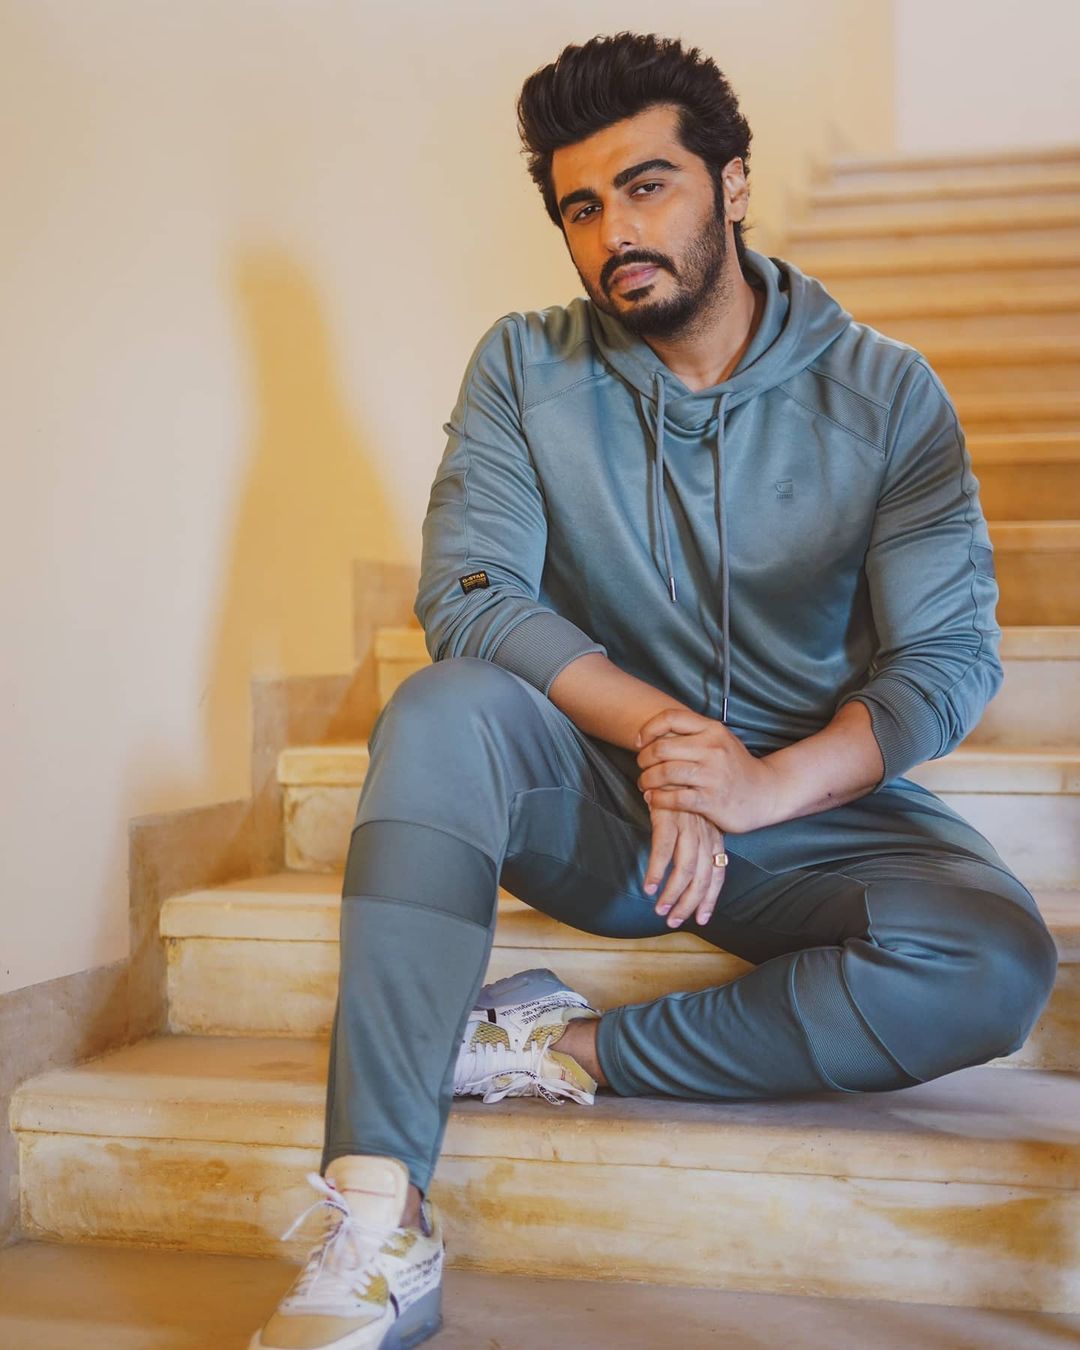 Arjun Kapoor Plans To Stay In Bollywood For 90 More Years; Says ‘I Know My Self-Worth’